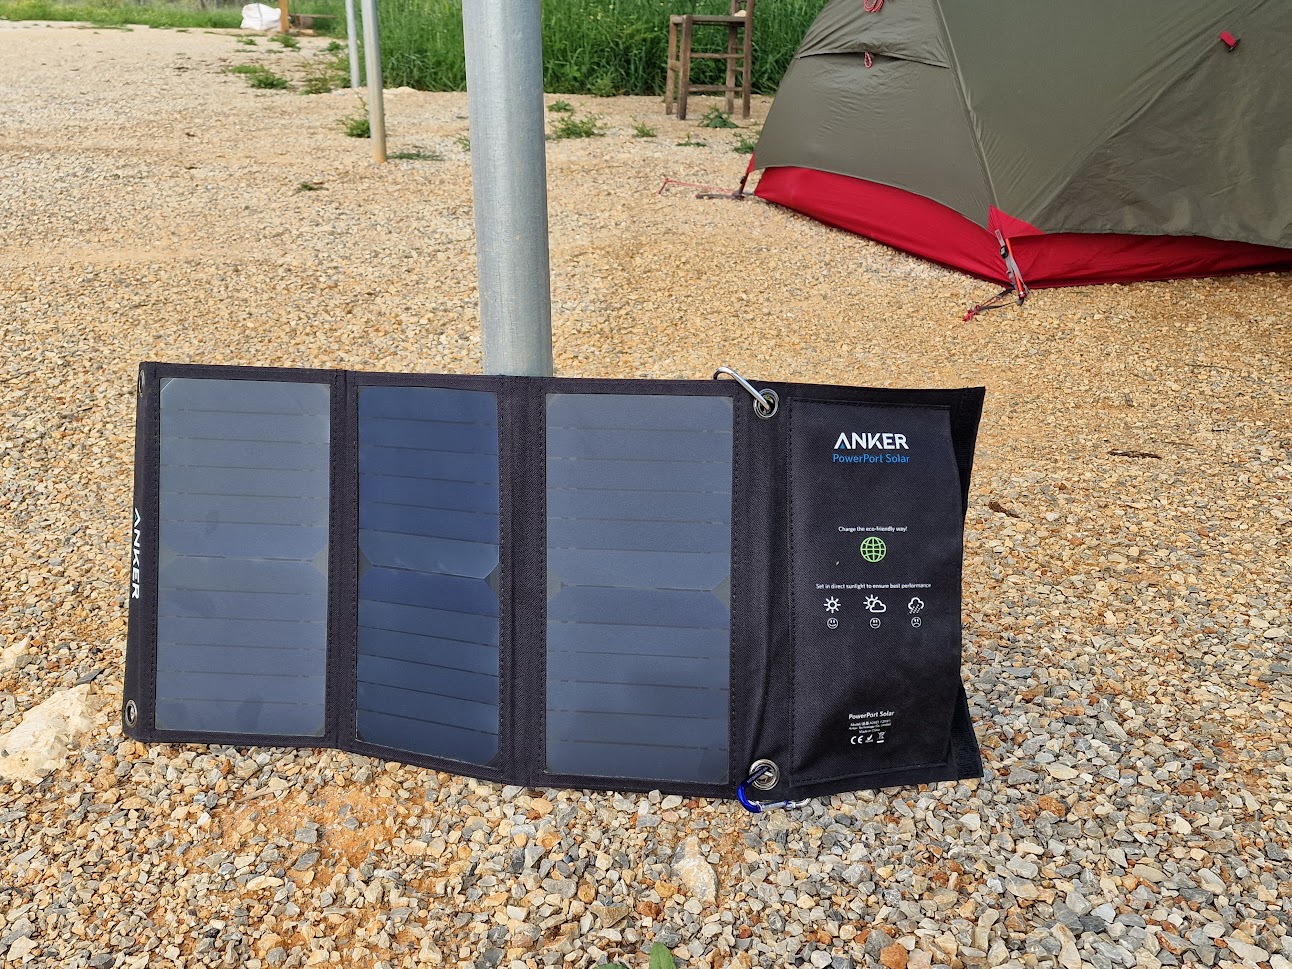 Anker solar panel is good for charging mobile phones when bike touring